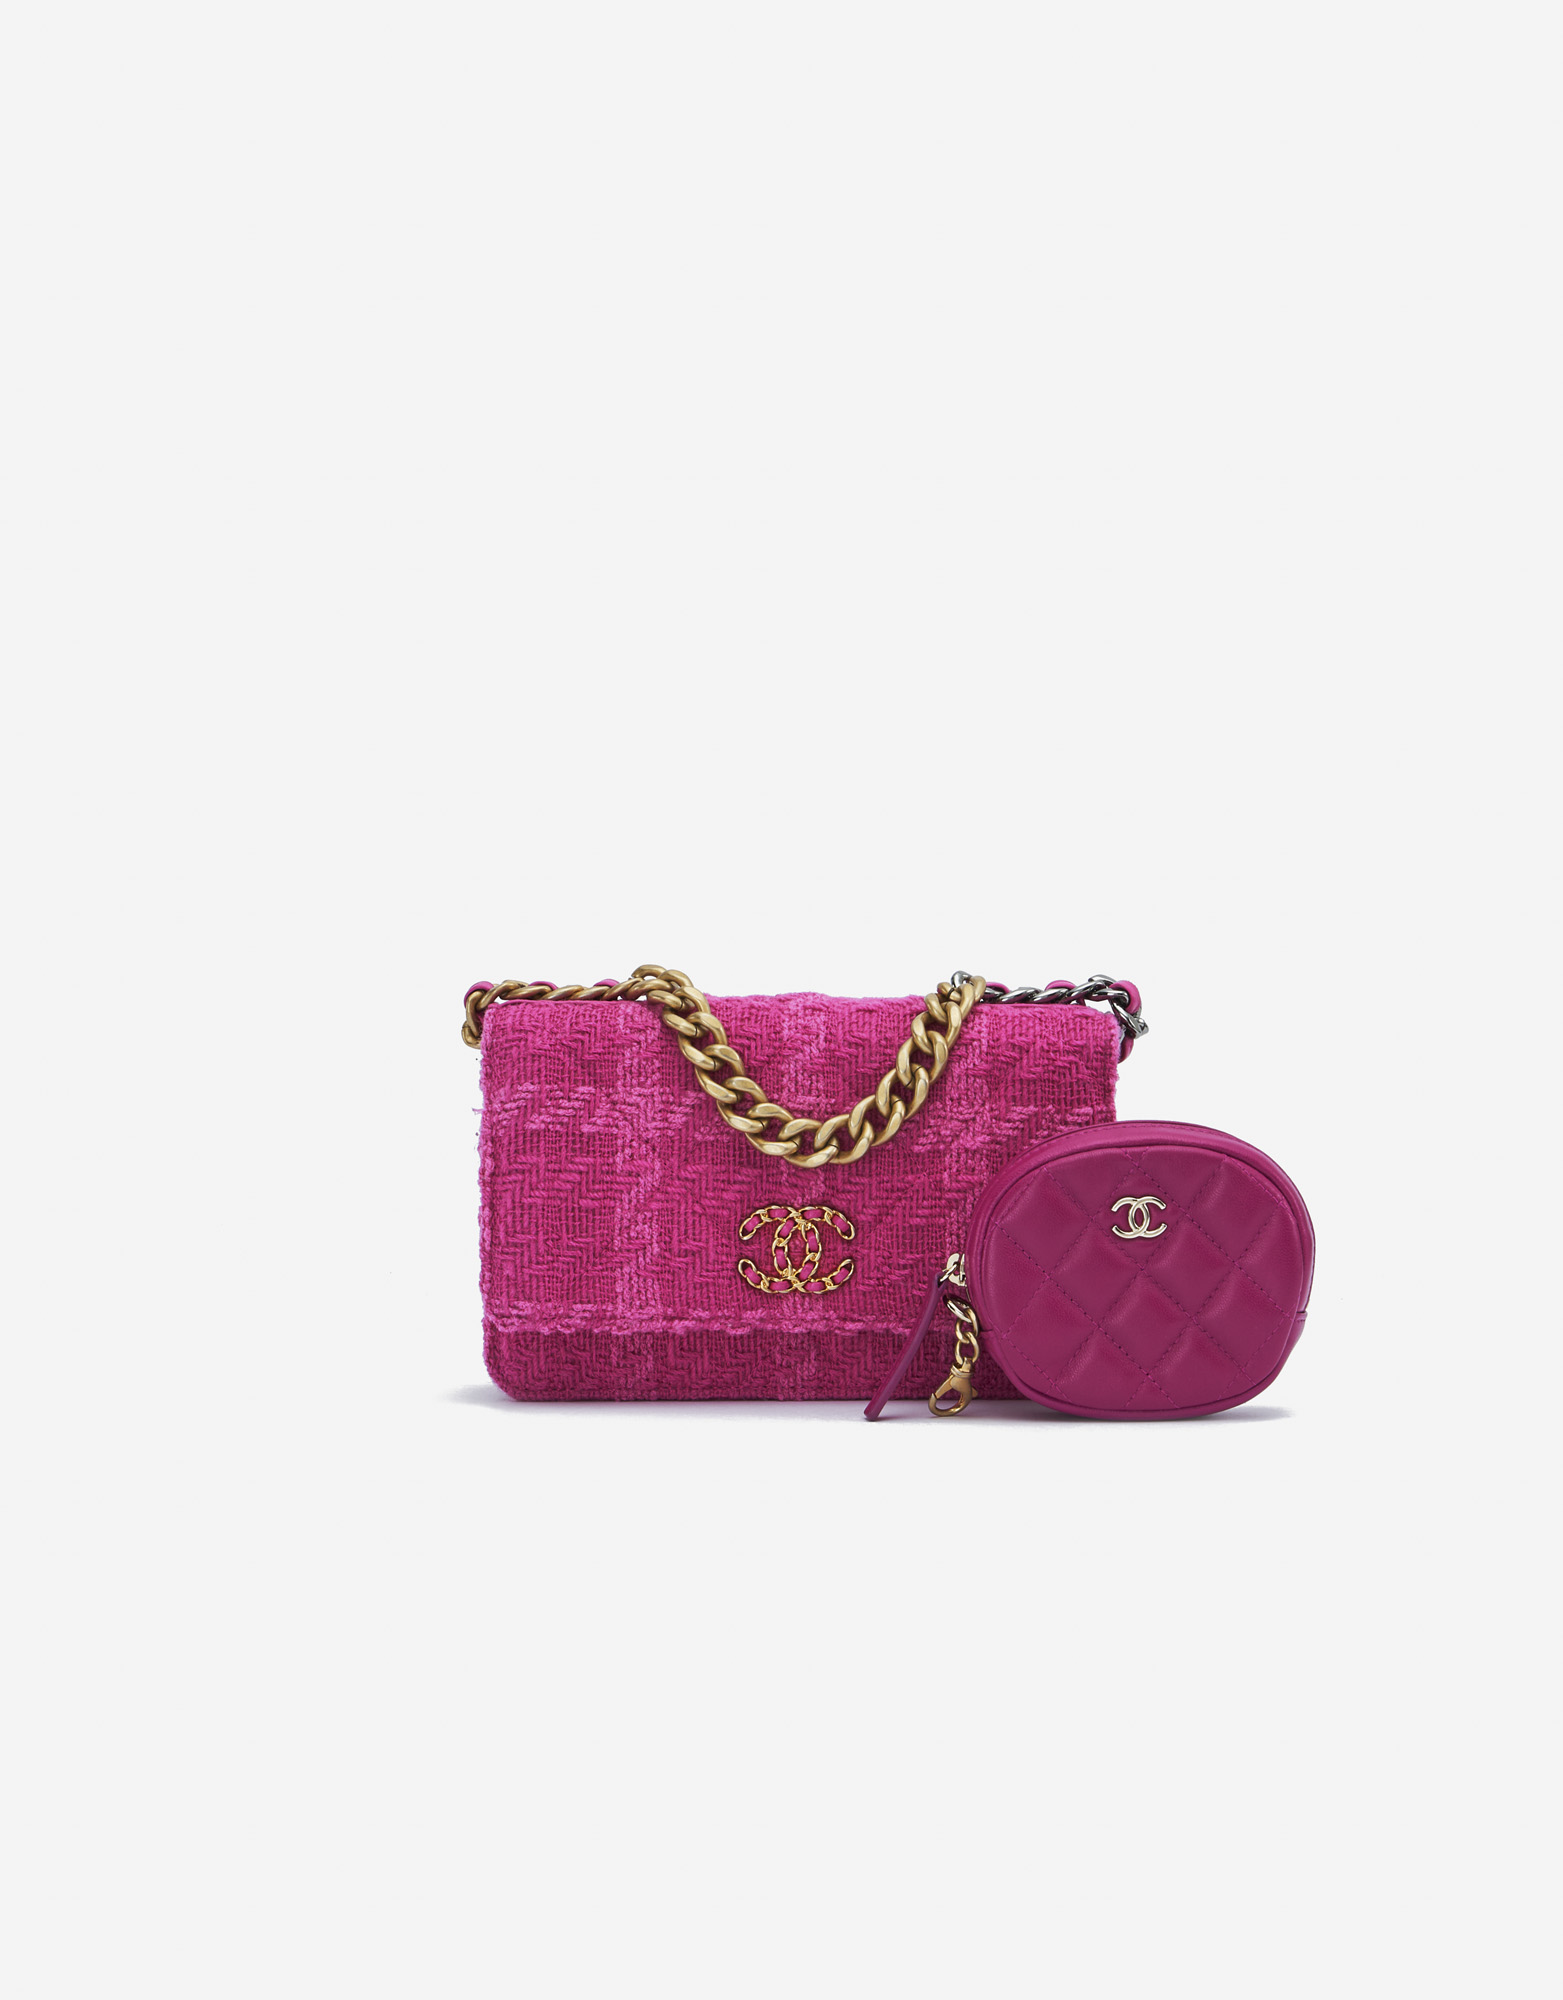 Chanel 19 Wallet On Chain Tweed Pink | SACLÀB